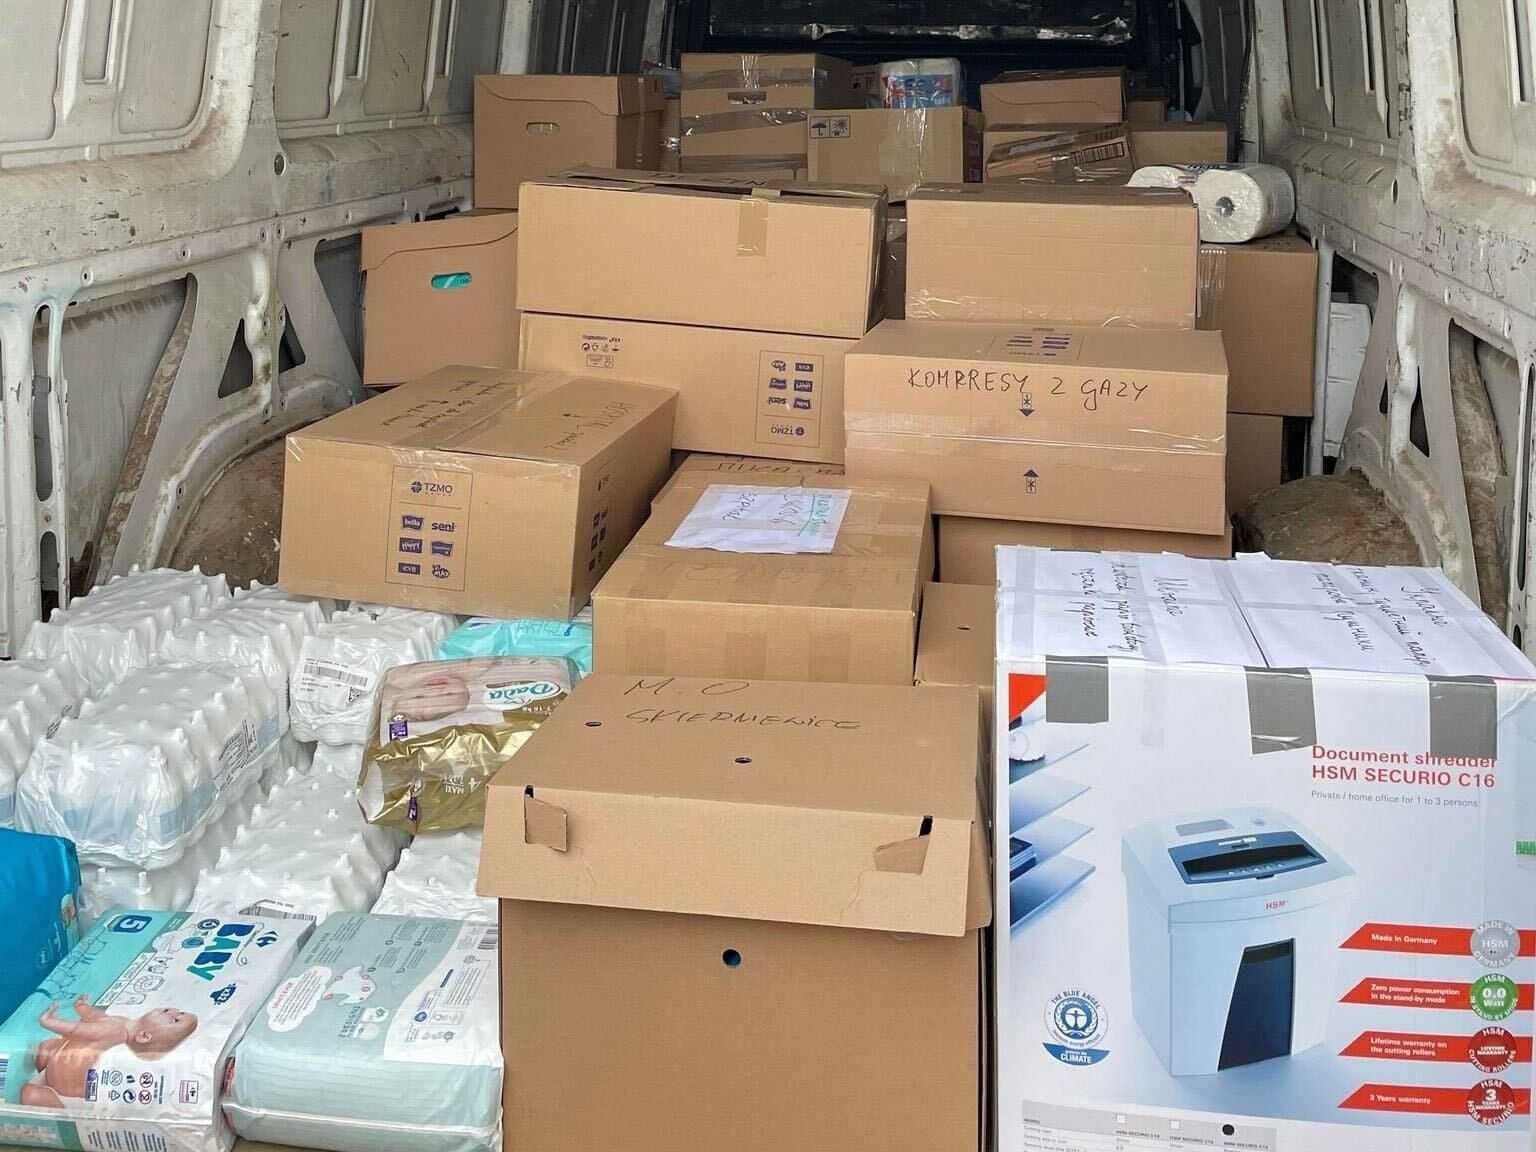 Products were safely delivered to Lviv  - Featured image